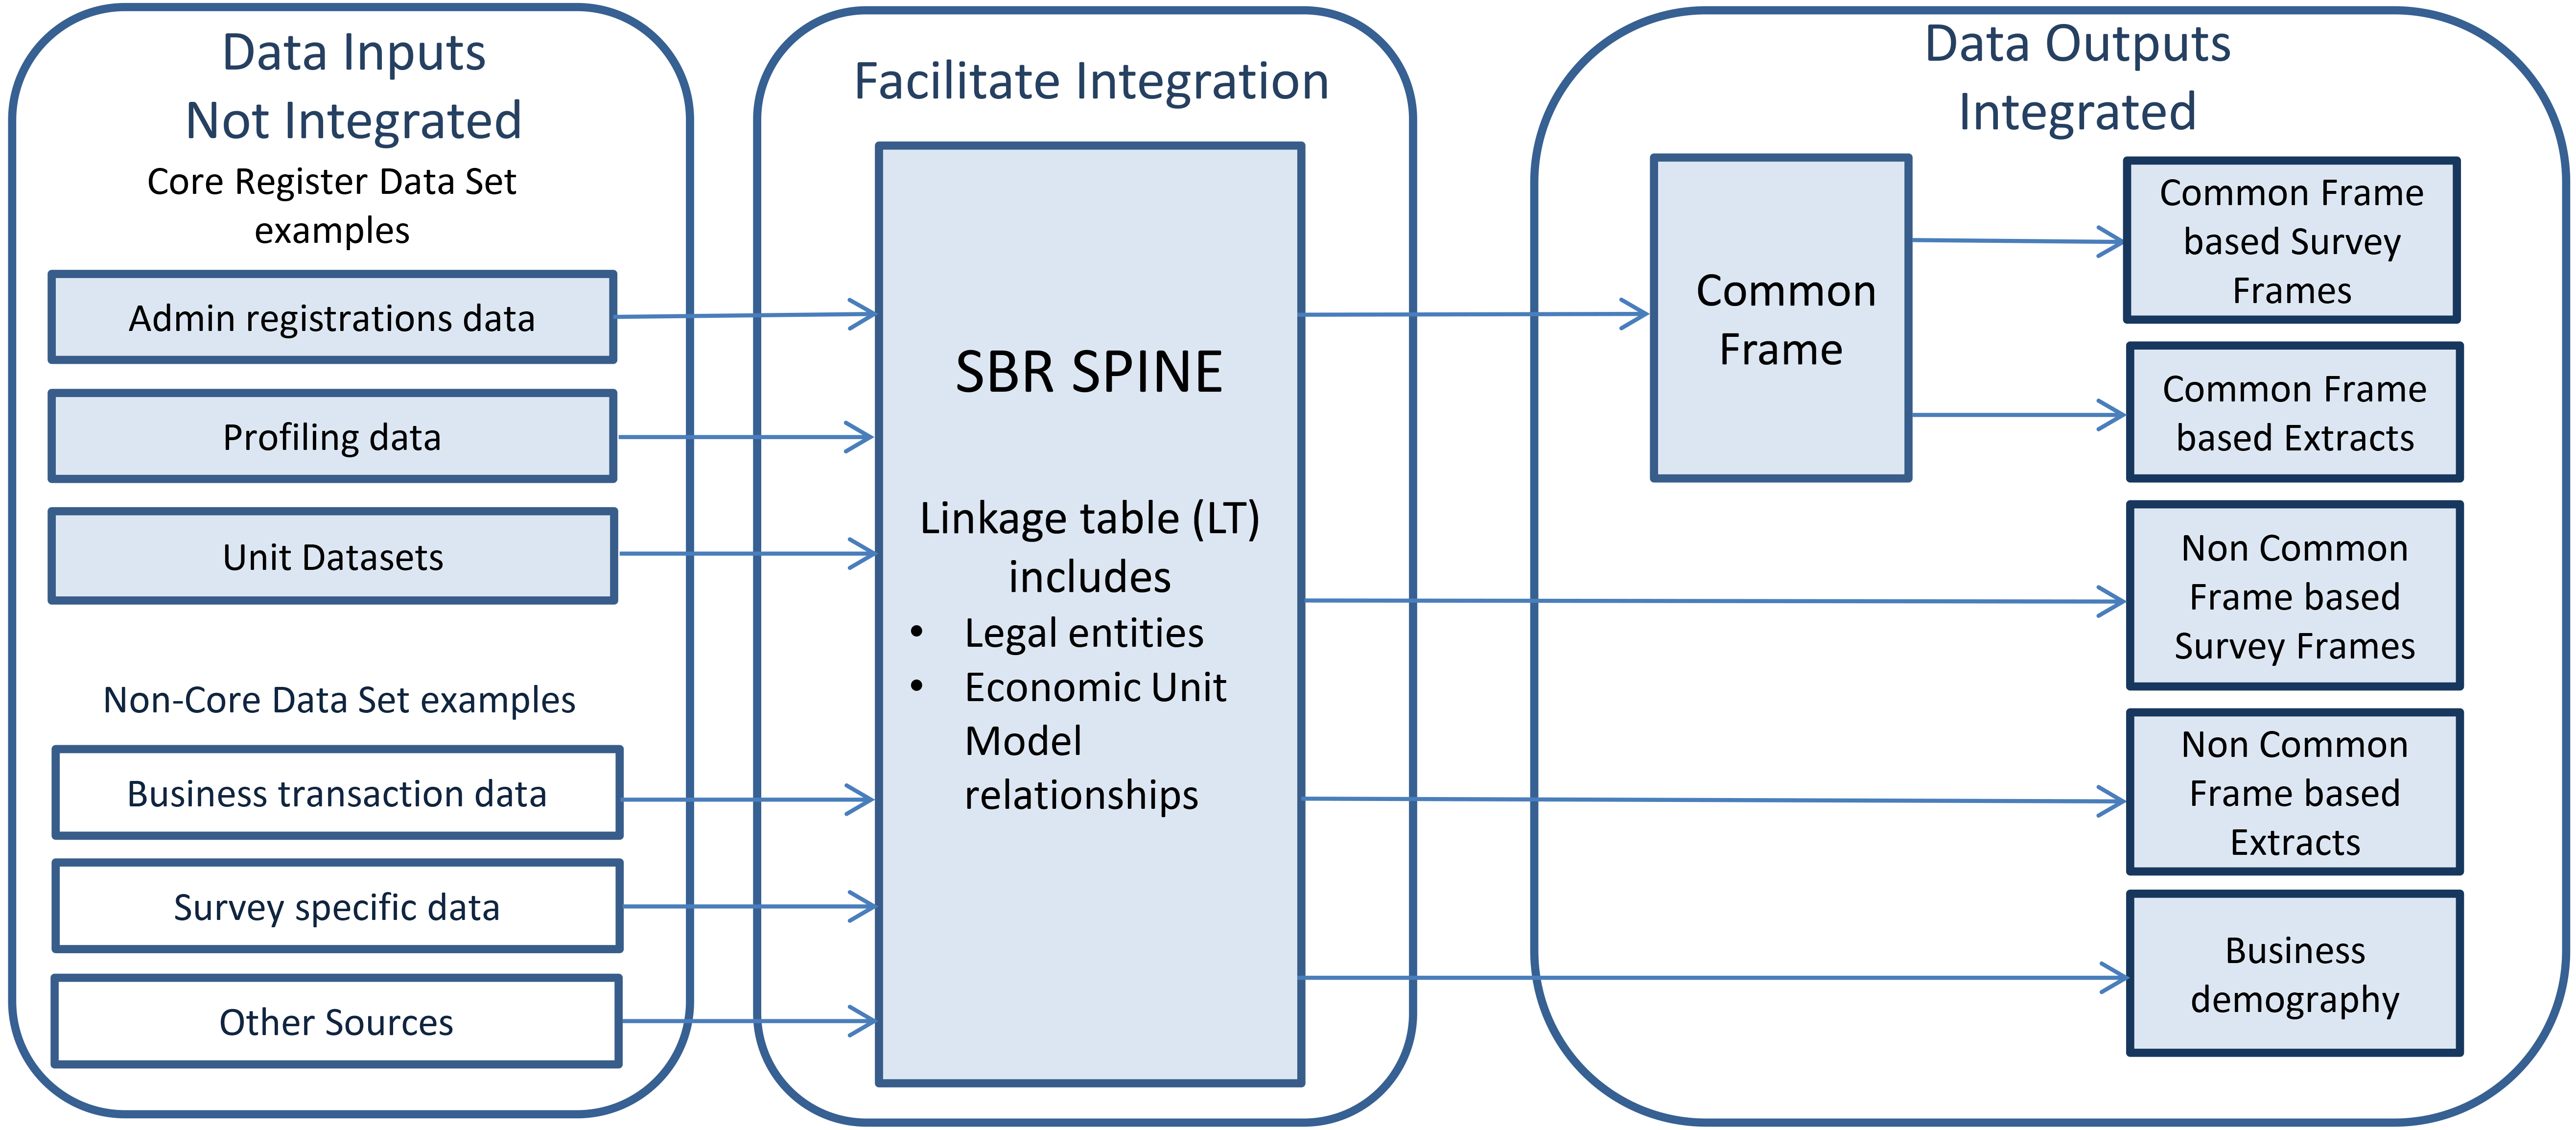 ABS business register as an integrating spine.